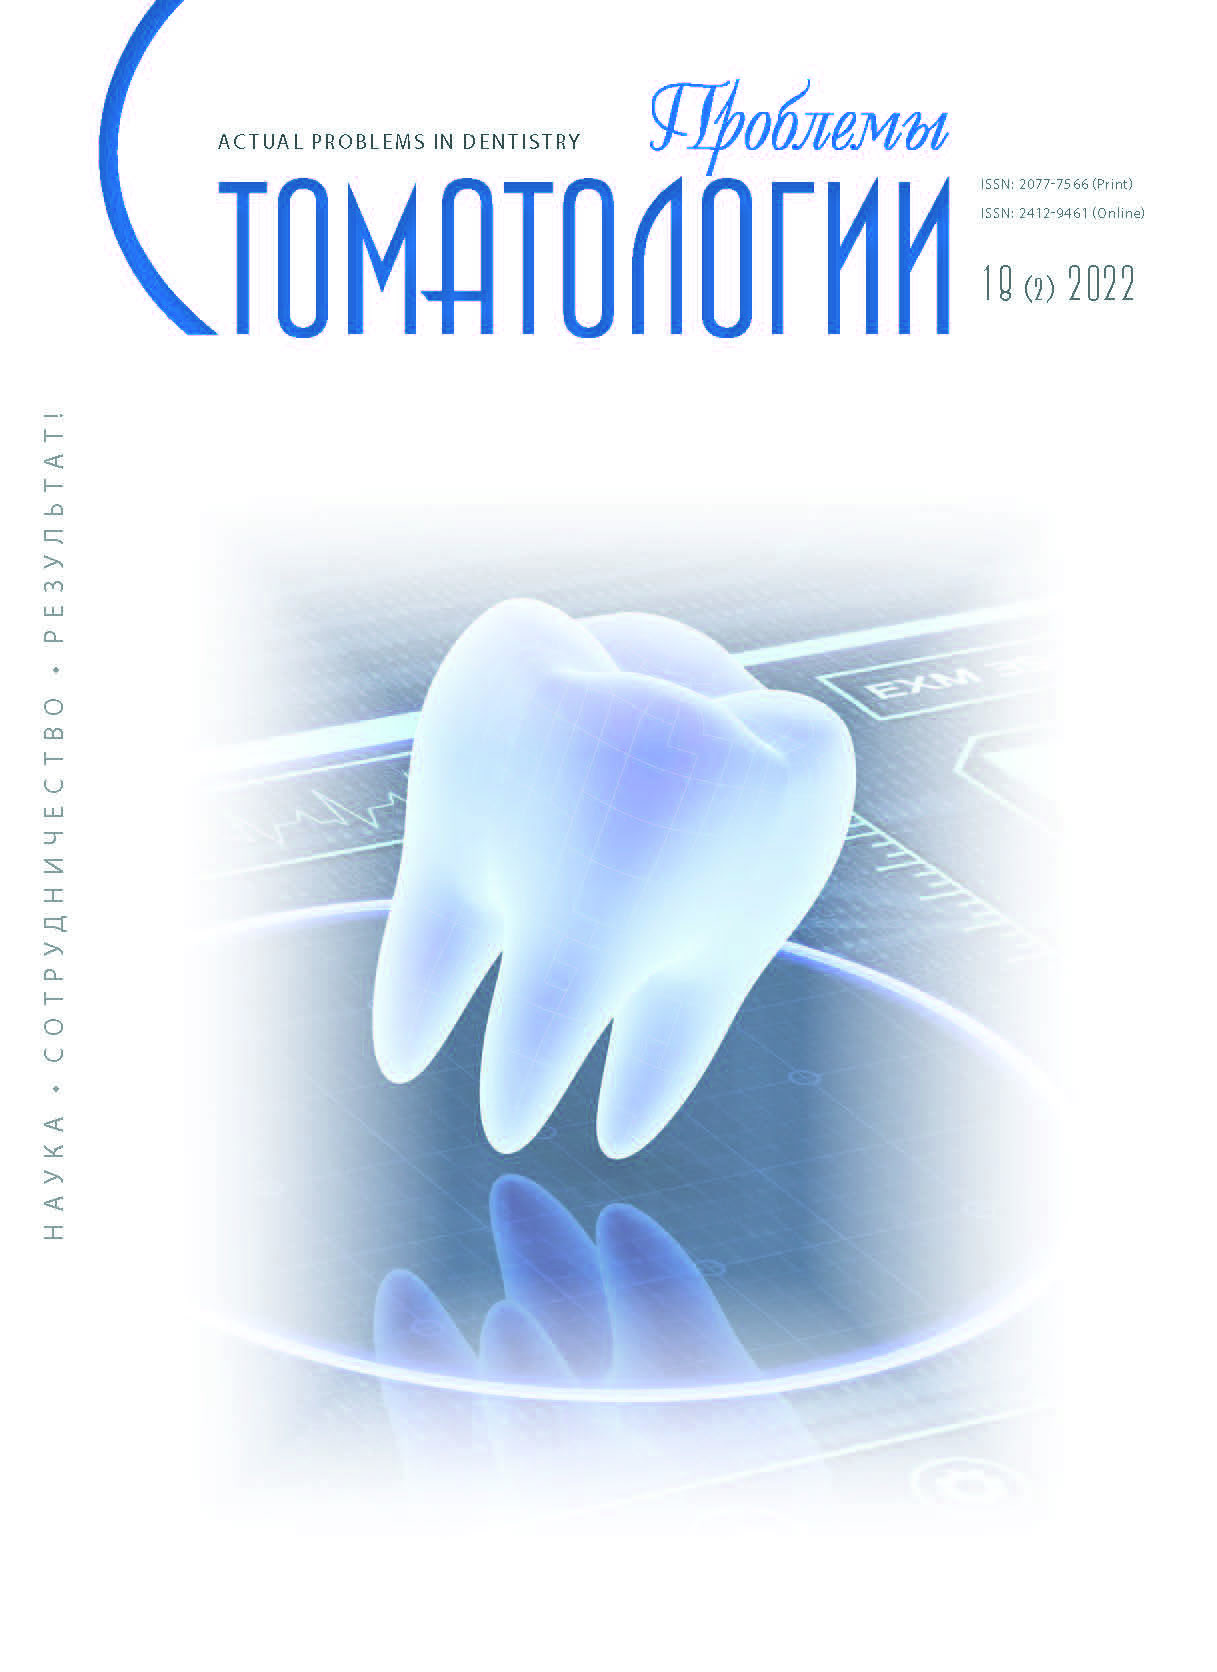                         PREDICTION OF CONSUMER ACTIONS IN THE IMPROPER PROVISION OF DENTAL SERVICES
            